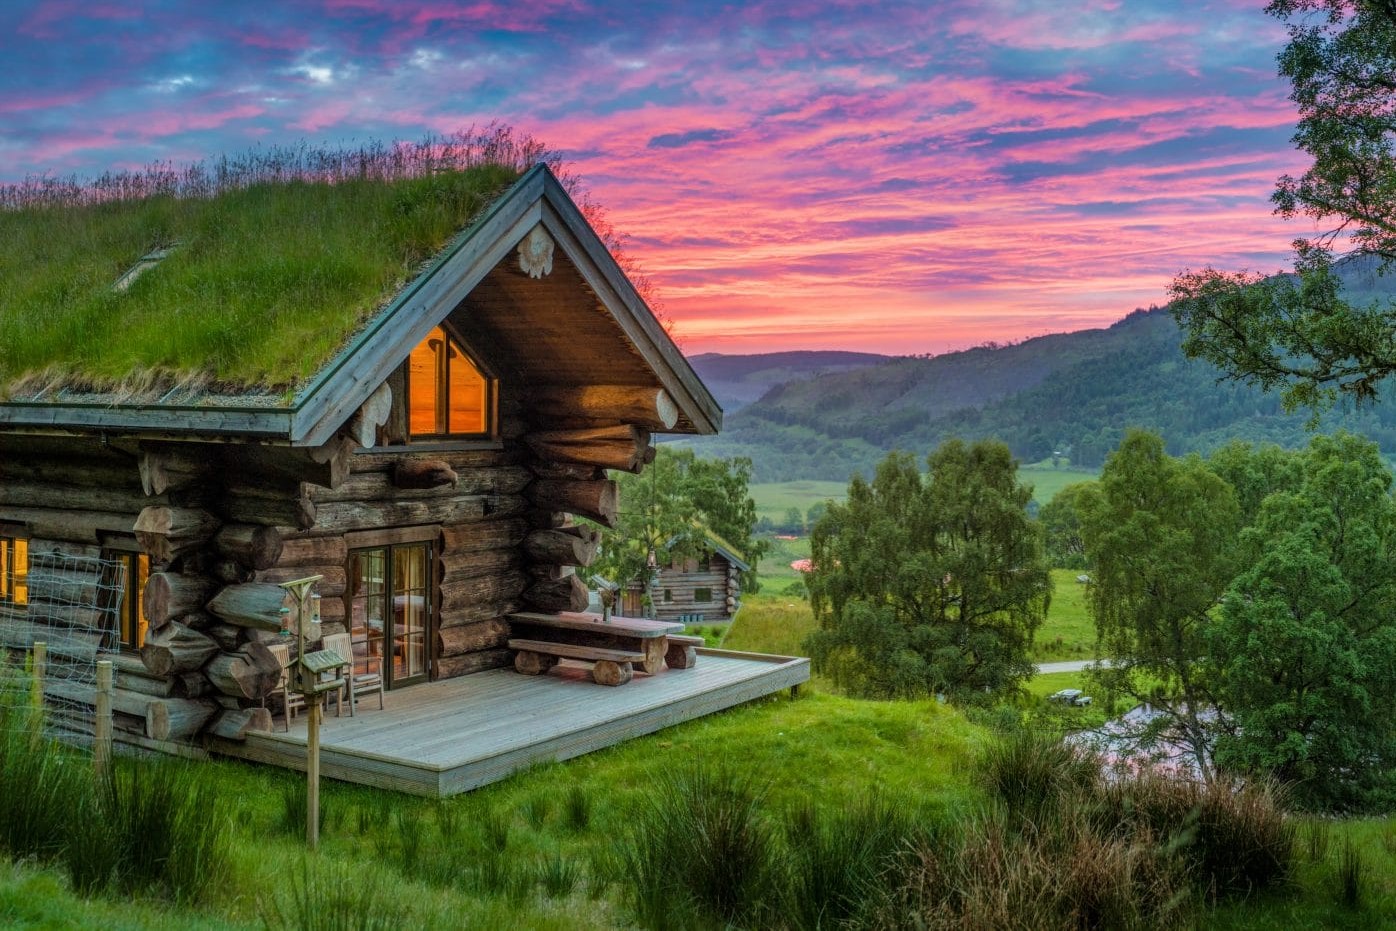 eagle-brae-log-cabin-on-hill-at-sunset-lodges-with-hot-tubs-scotland